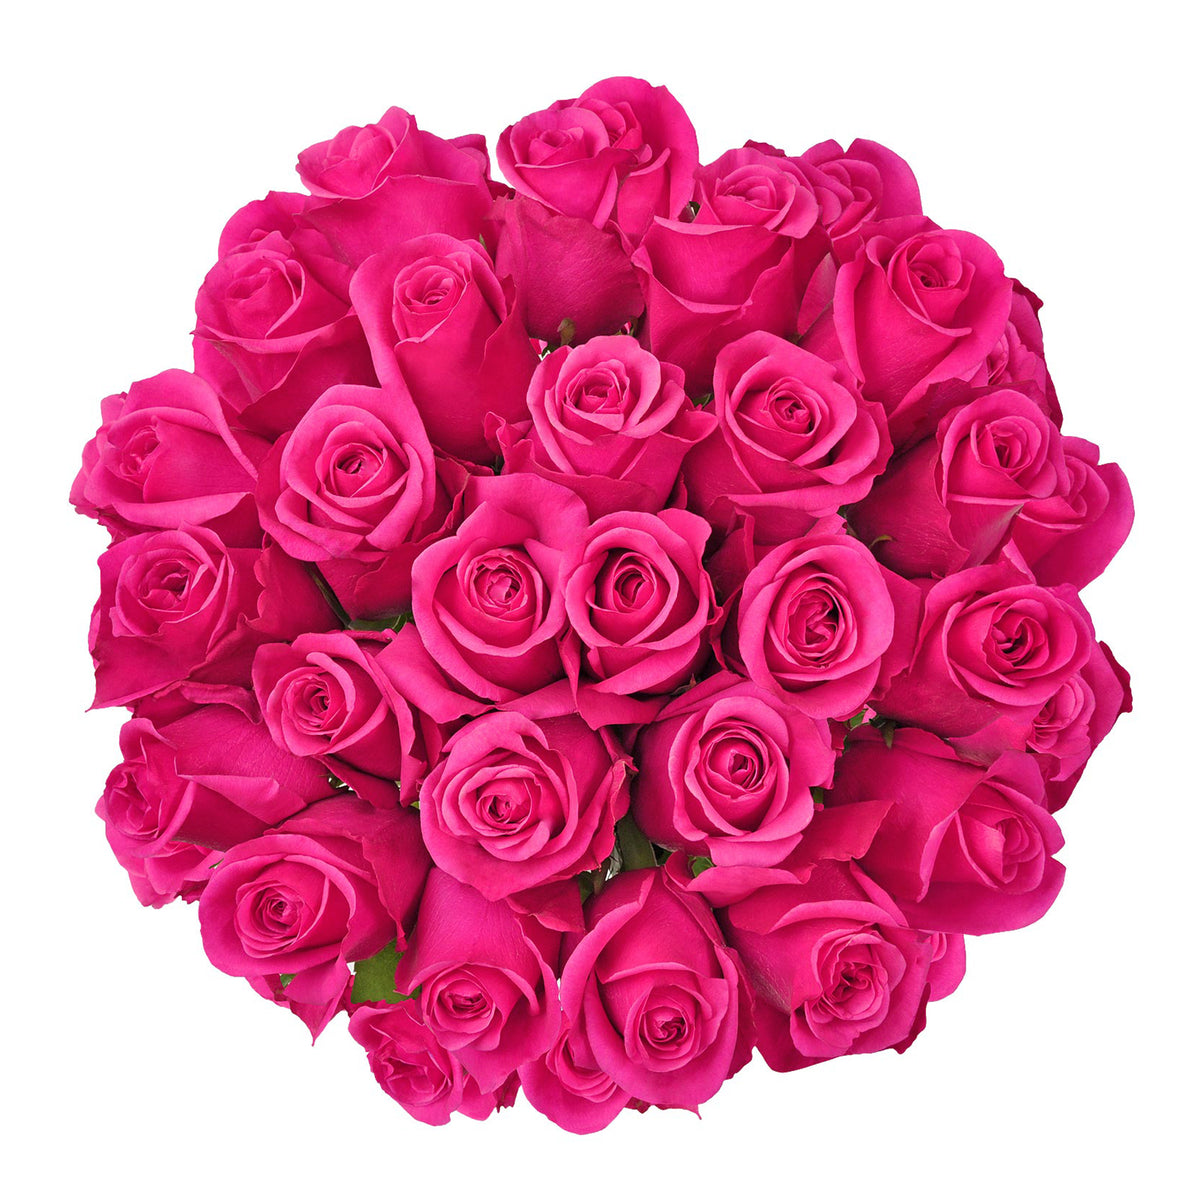 Happy Birthday Flowers - Blossom in a Box of Pink and White Roses - 40